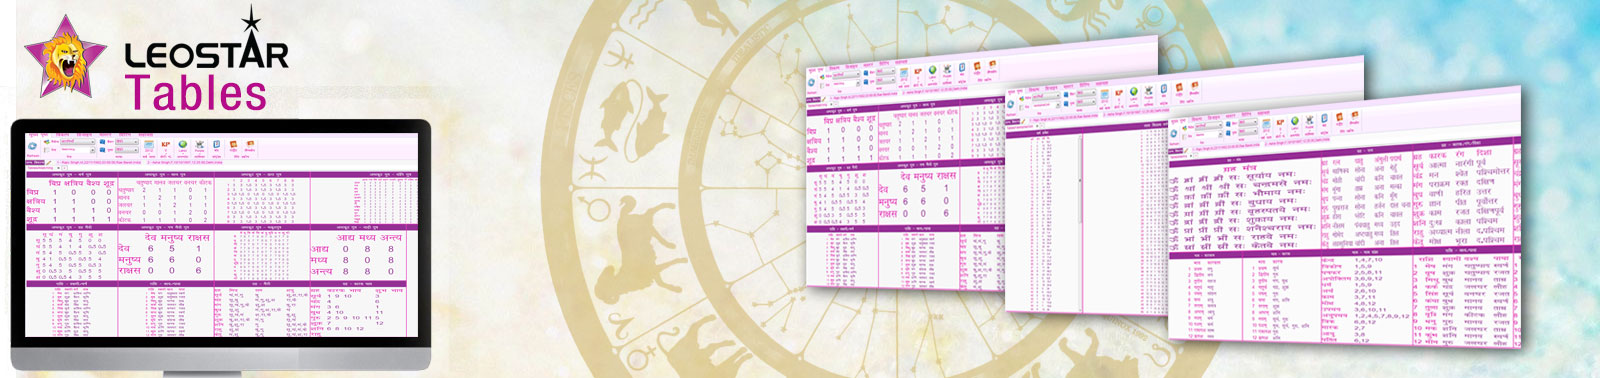 astrology tables software